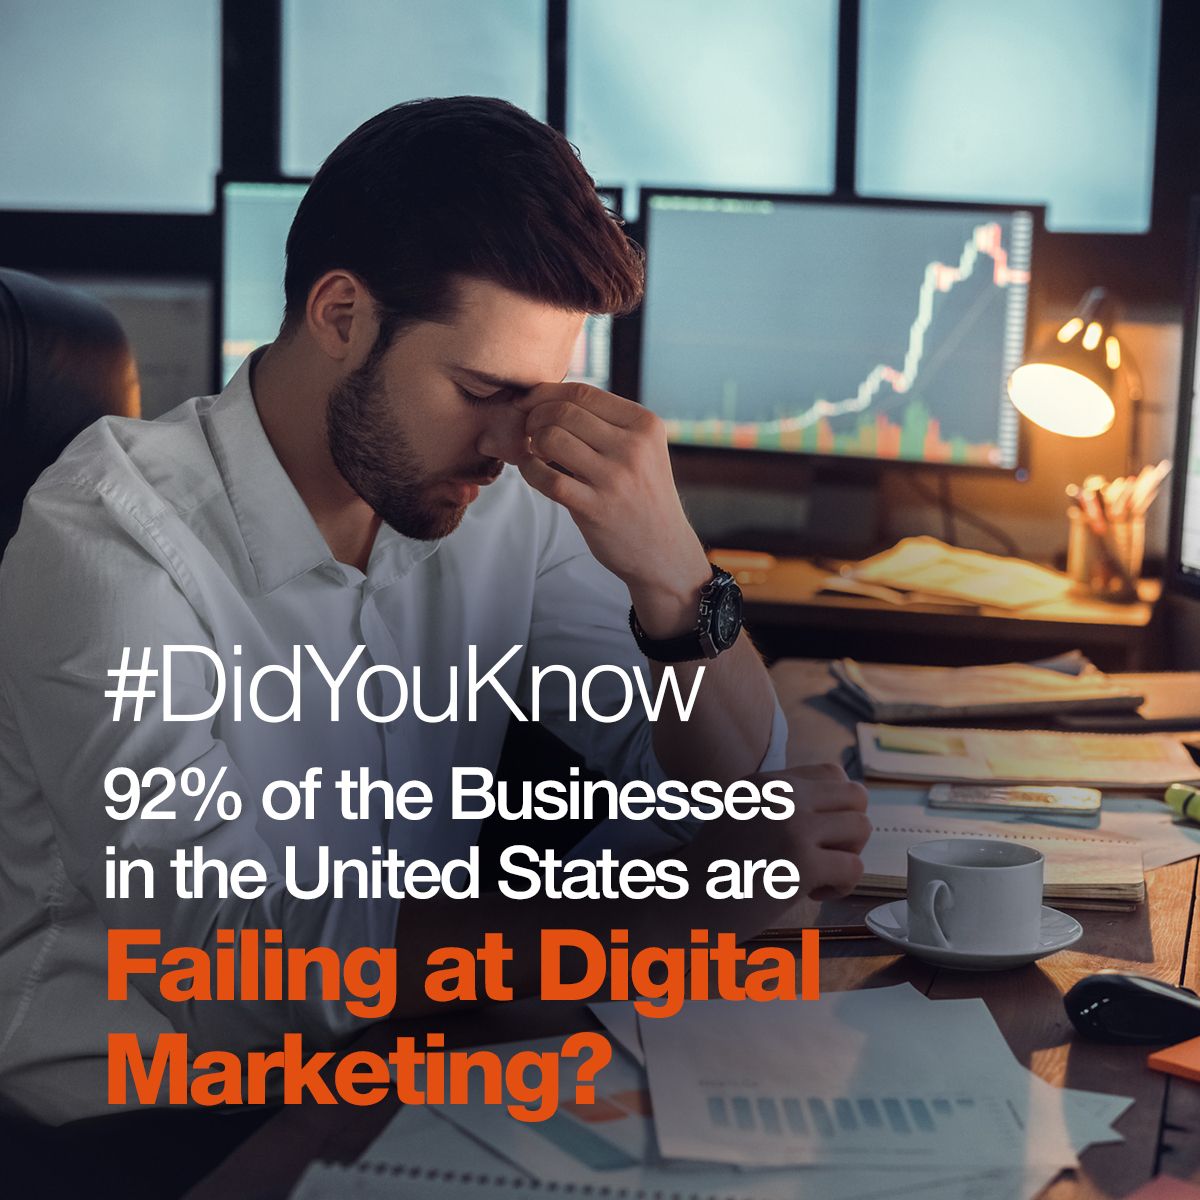 Did You Know That 92% of the 30 million Businesses in the United States are Failing at Digital Marketing?